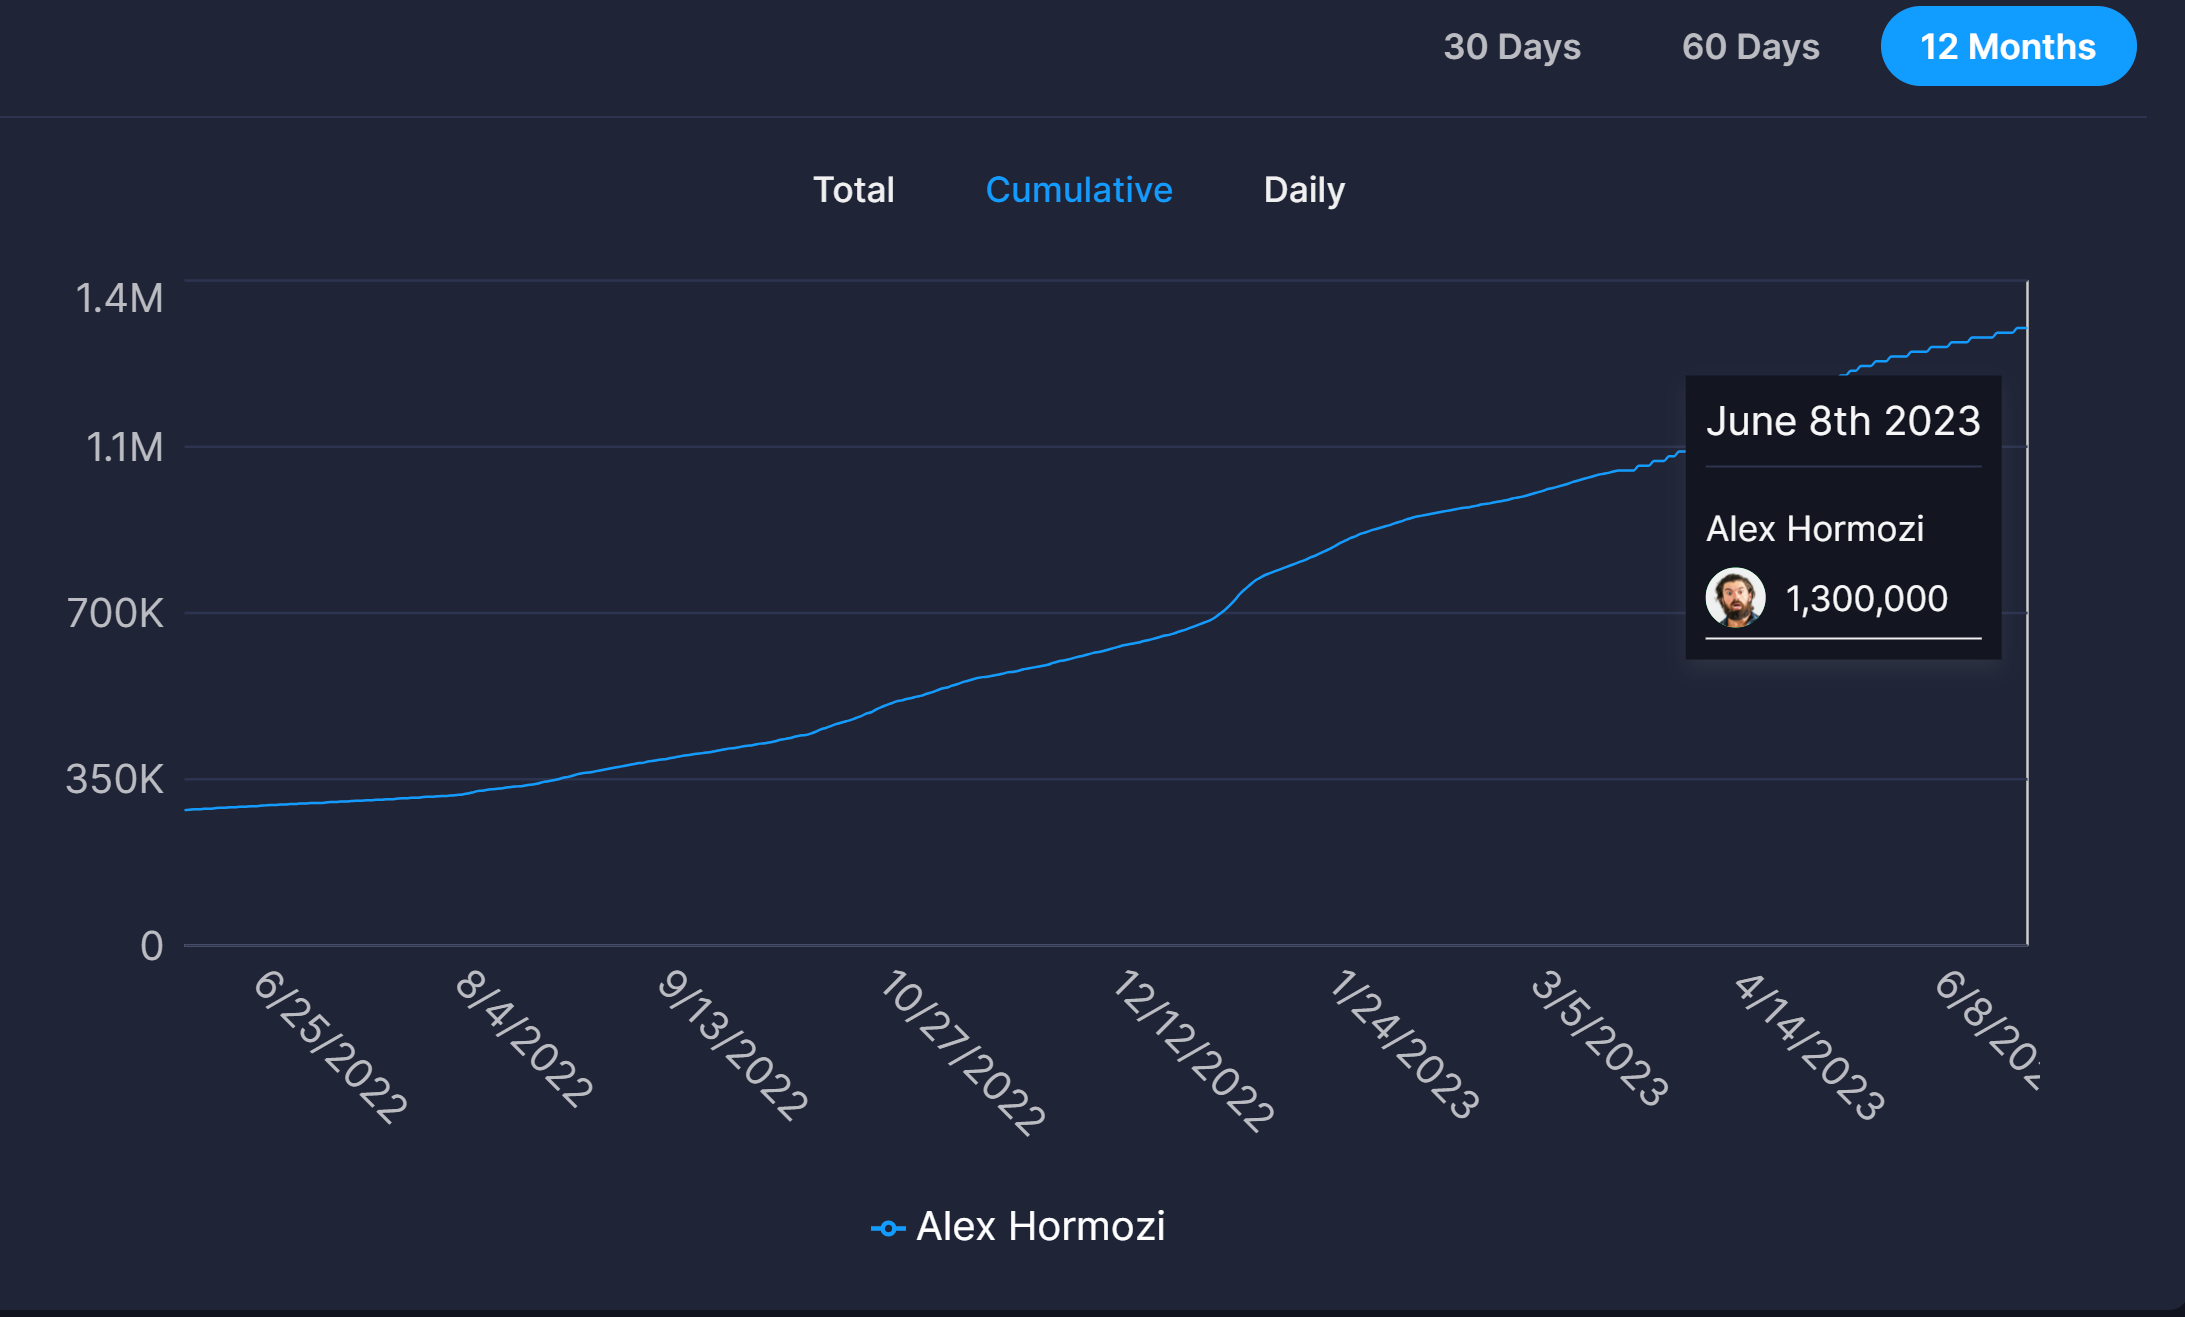 YouTube analytics chart showing Alex Hormozi subscriber growth over 12 months